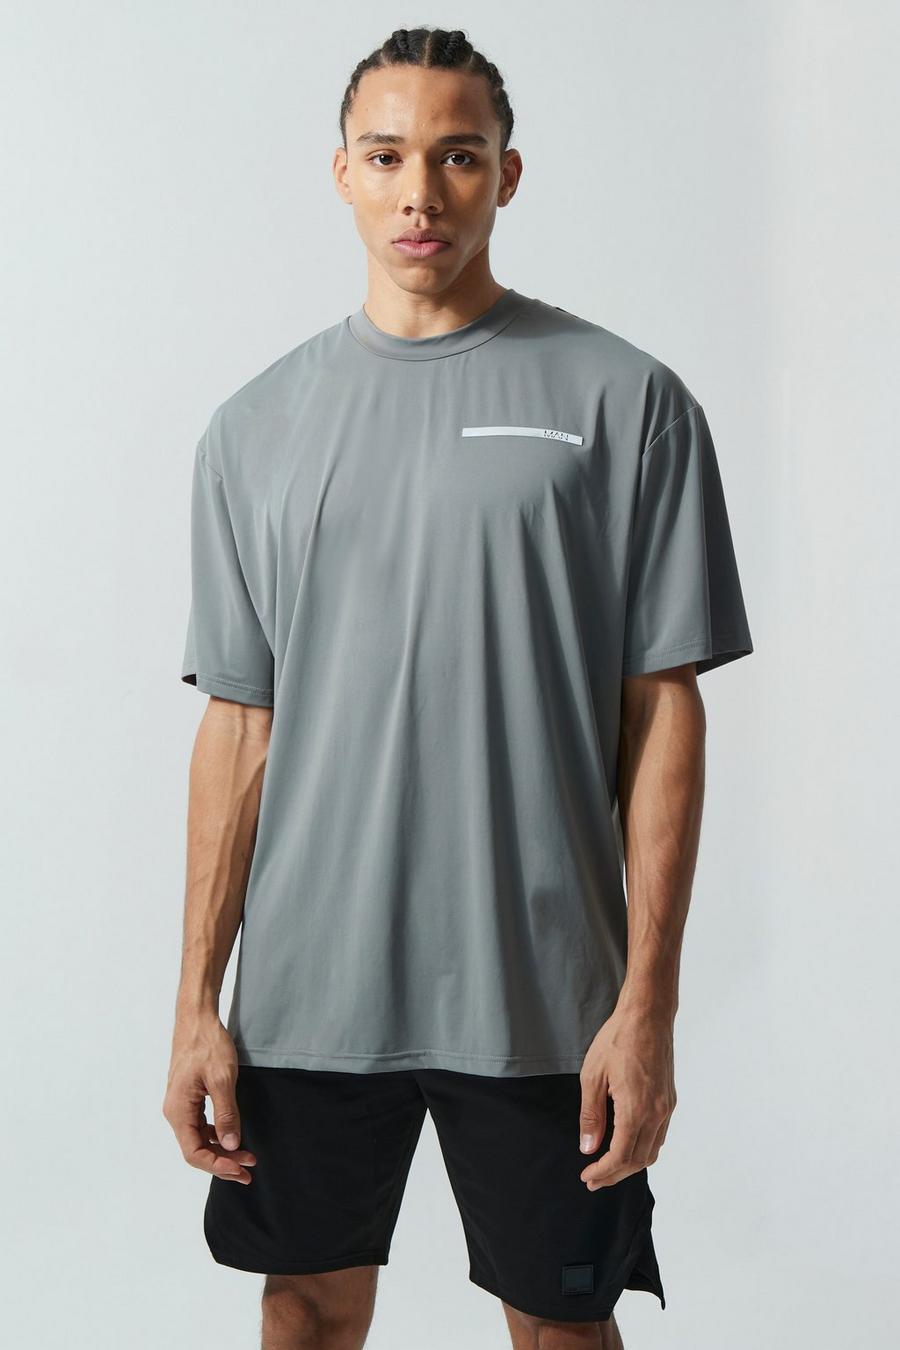 Charcoal gris Tall Oversized Man Active Performance T-Shirt 